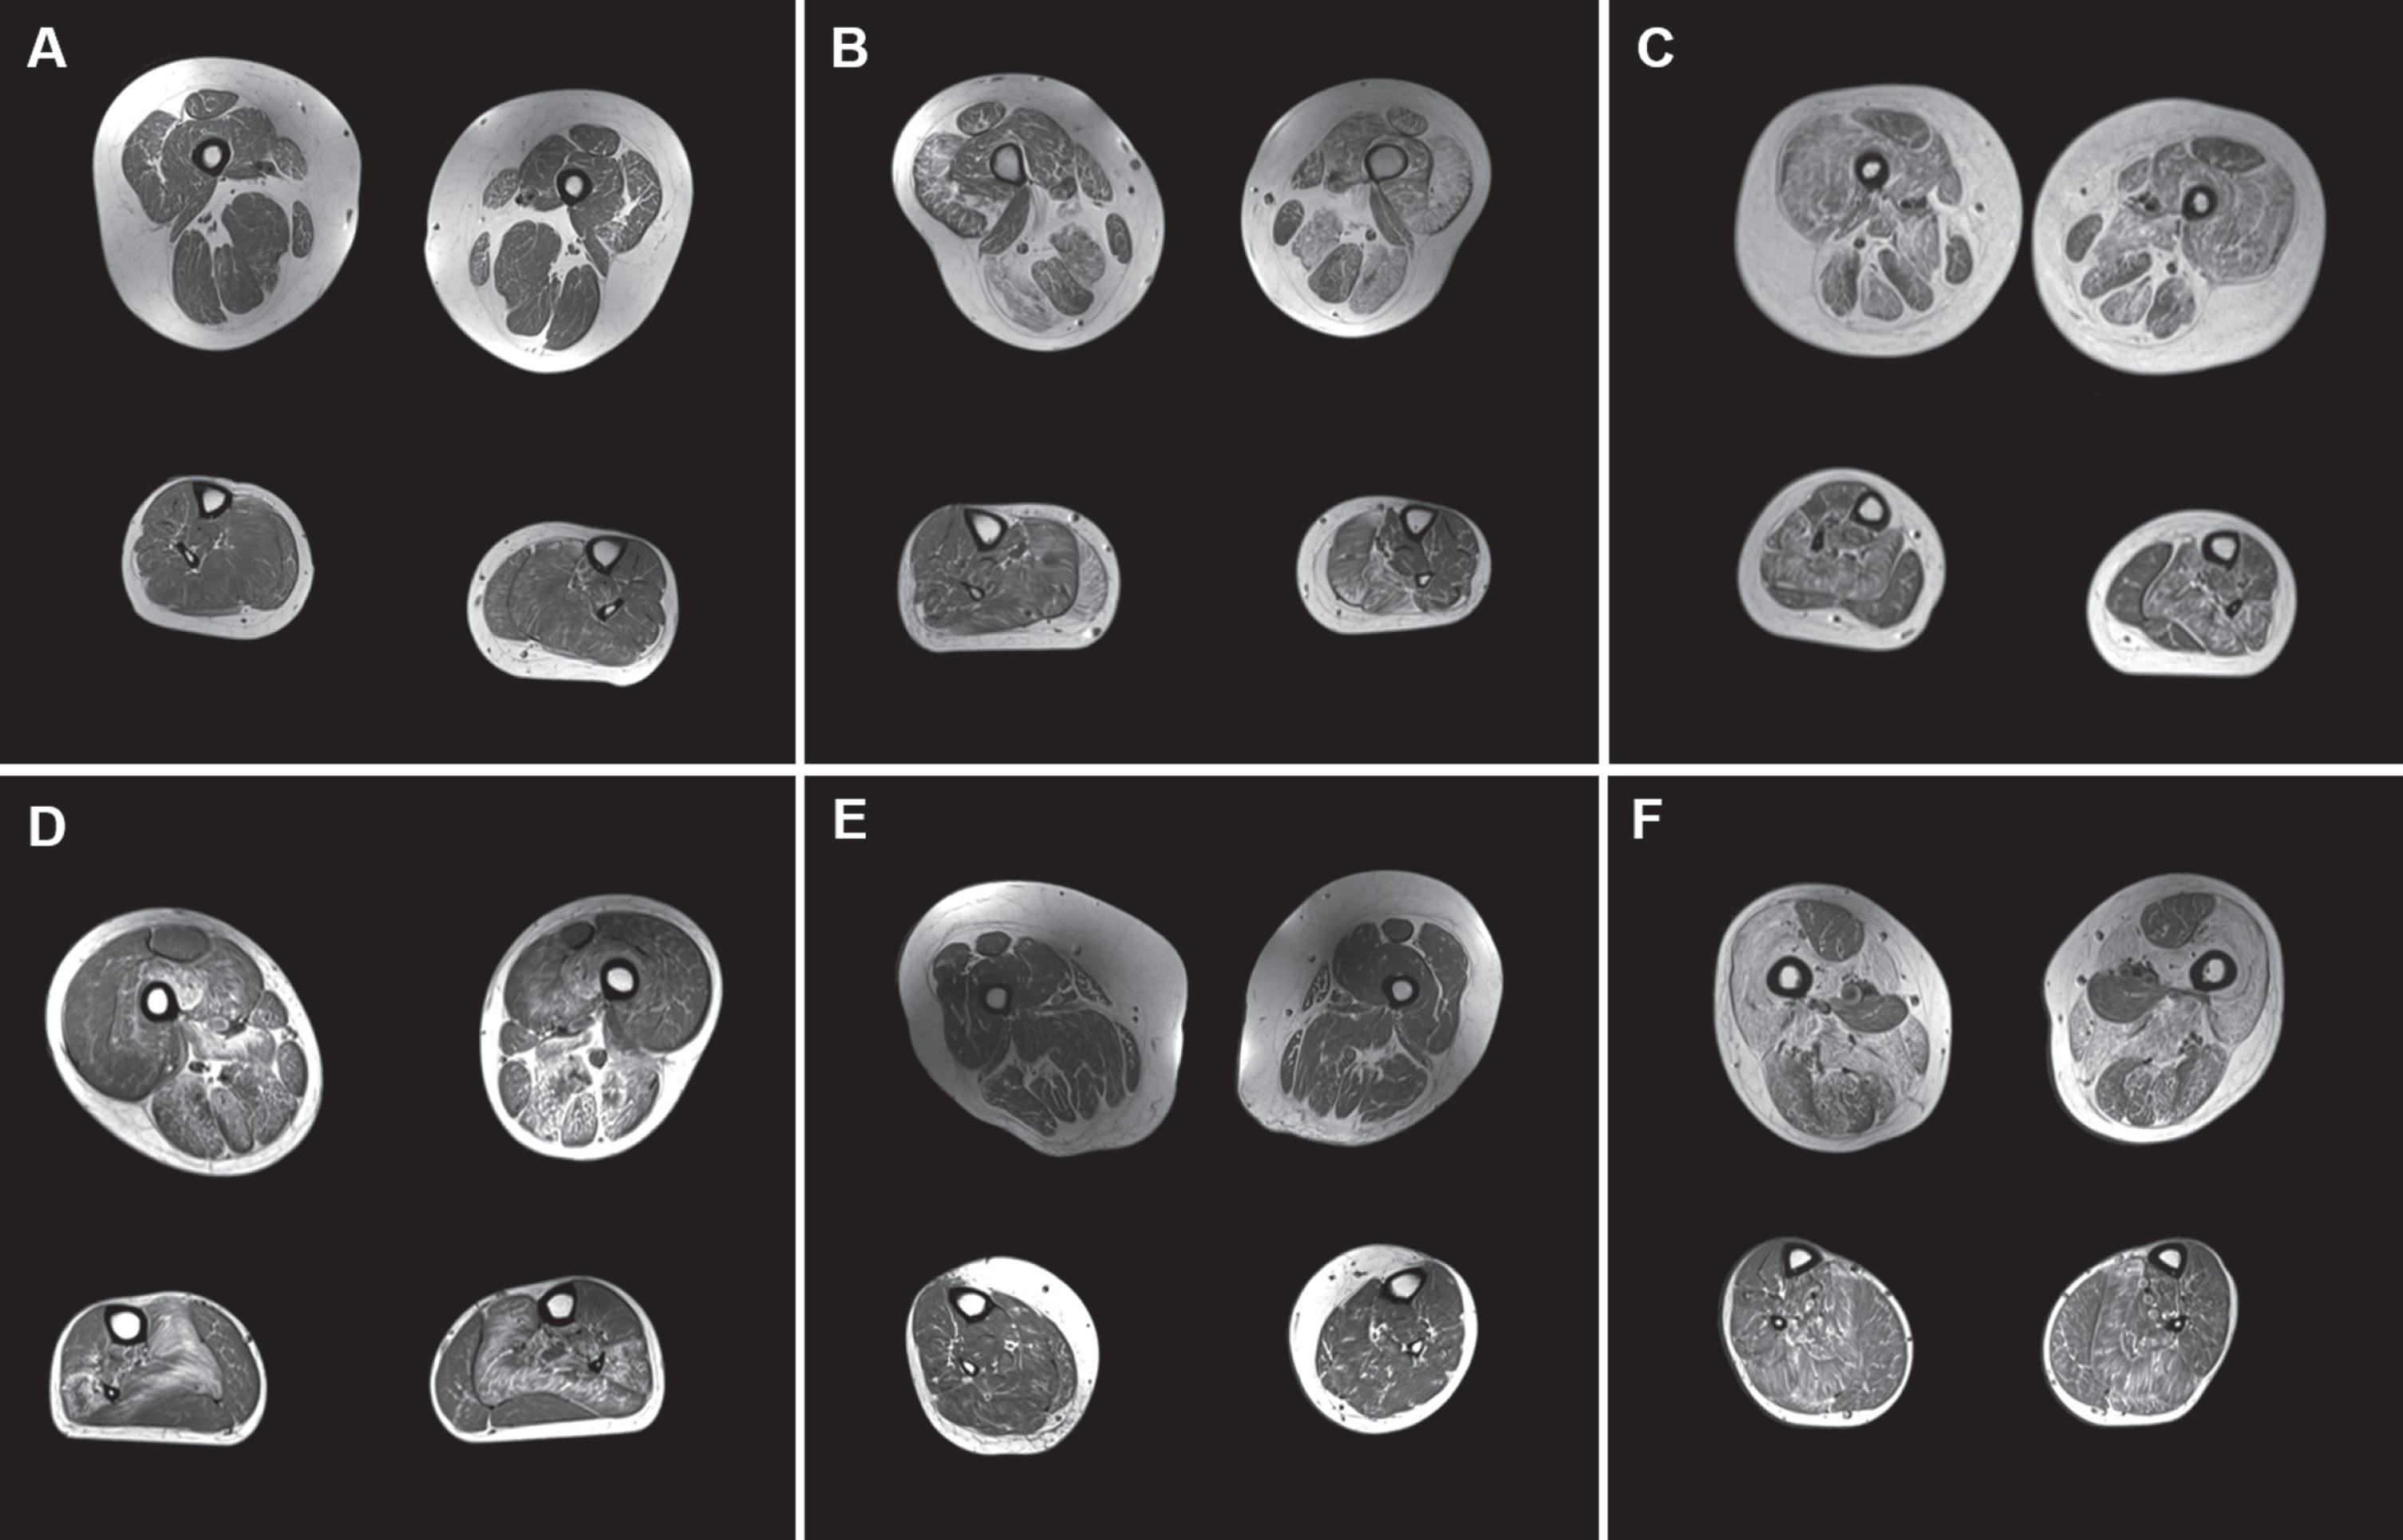 A-F: MRI of 6 clinically severe cases. Upper and lower leg slices from cases with clinical severity scores > 5 (A: clinical severity score = 6; B = 5; C = 6; D = 7; E = 6; F = 5) with relative sparing of rectus femoris (in A, E, and F), adductor longus and gracilis in the upper leg, and soleus being the most affected muscle in the lower leg.